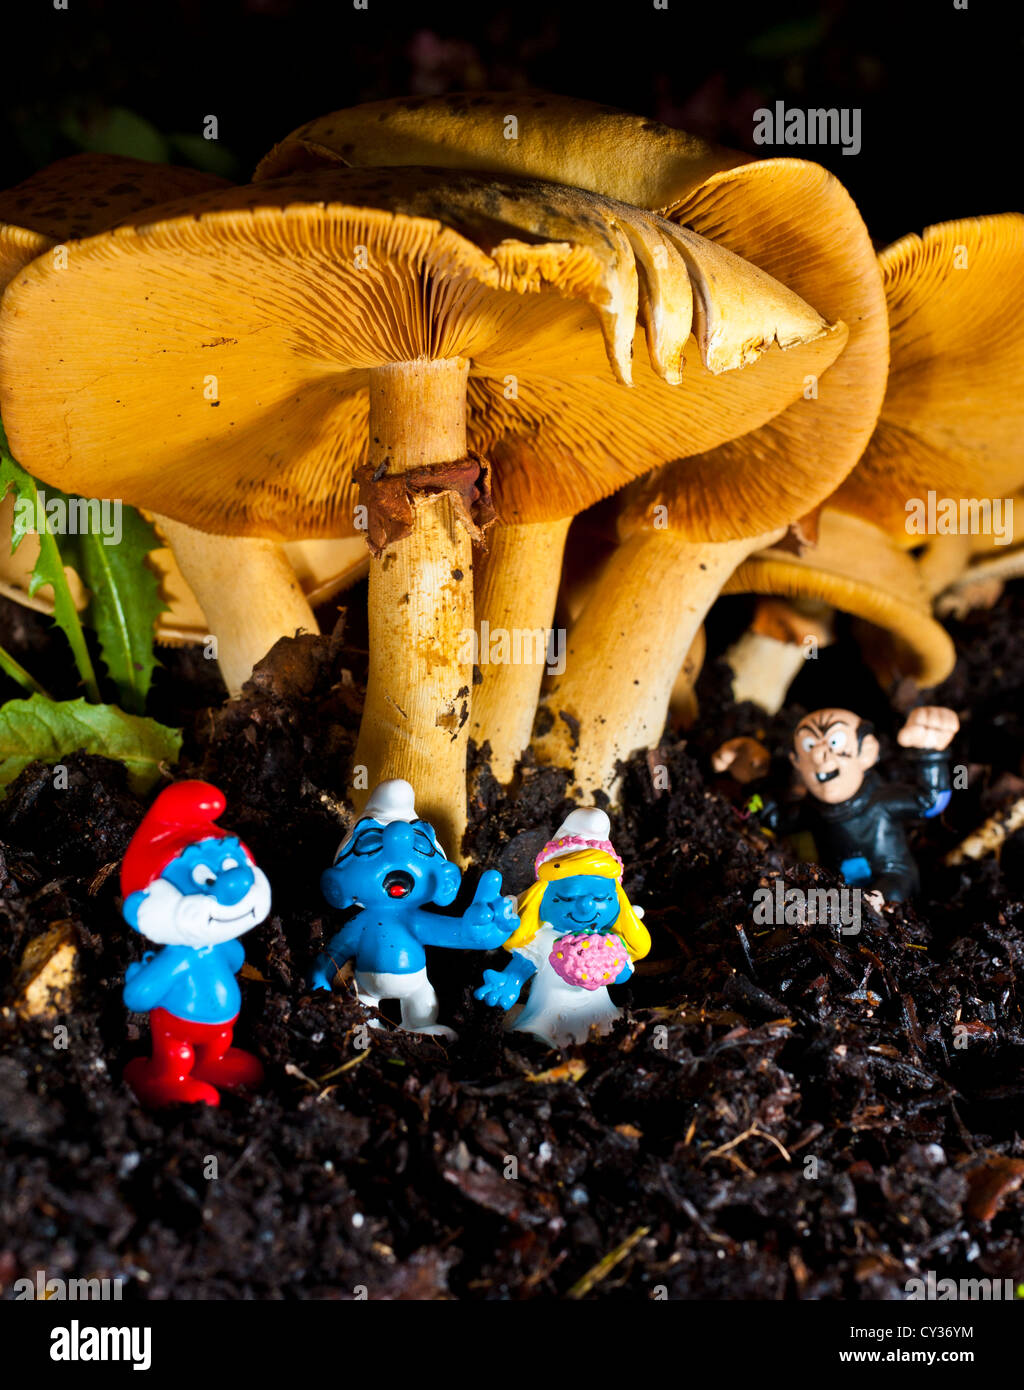 Smurfs gathered for a wedding under a mushroom with Gargamel hiding in the background Stock Photo